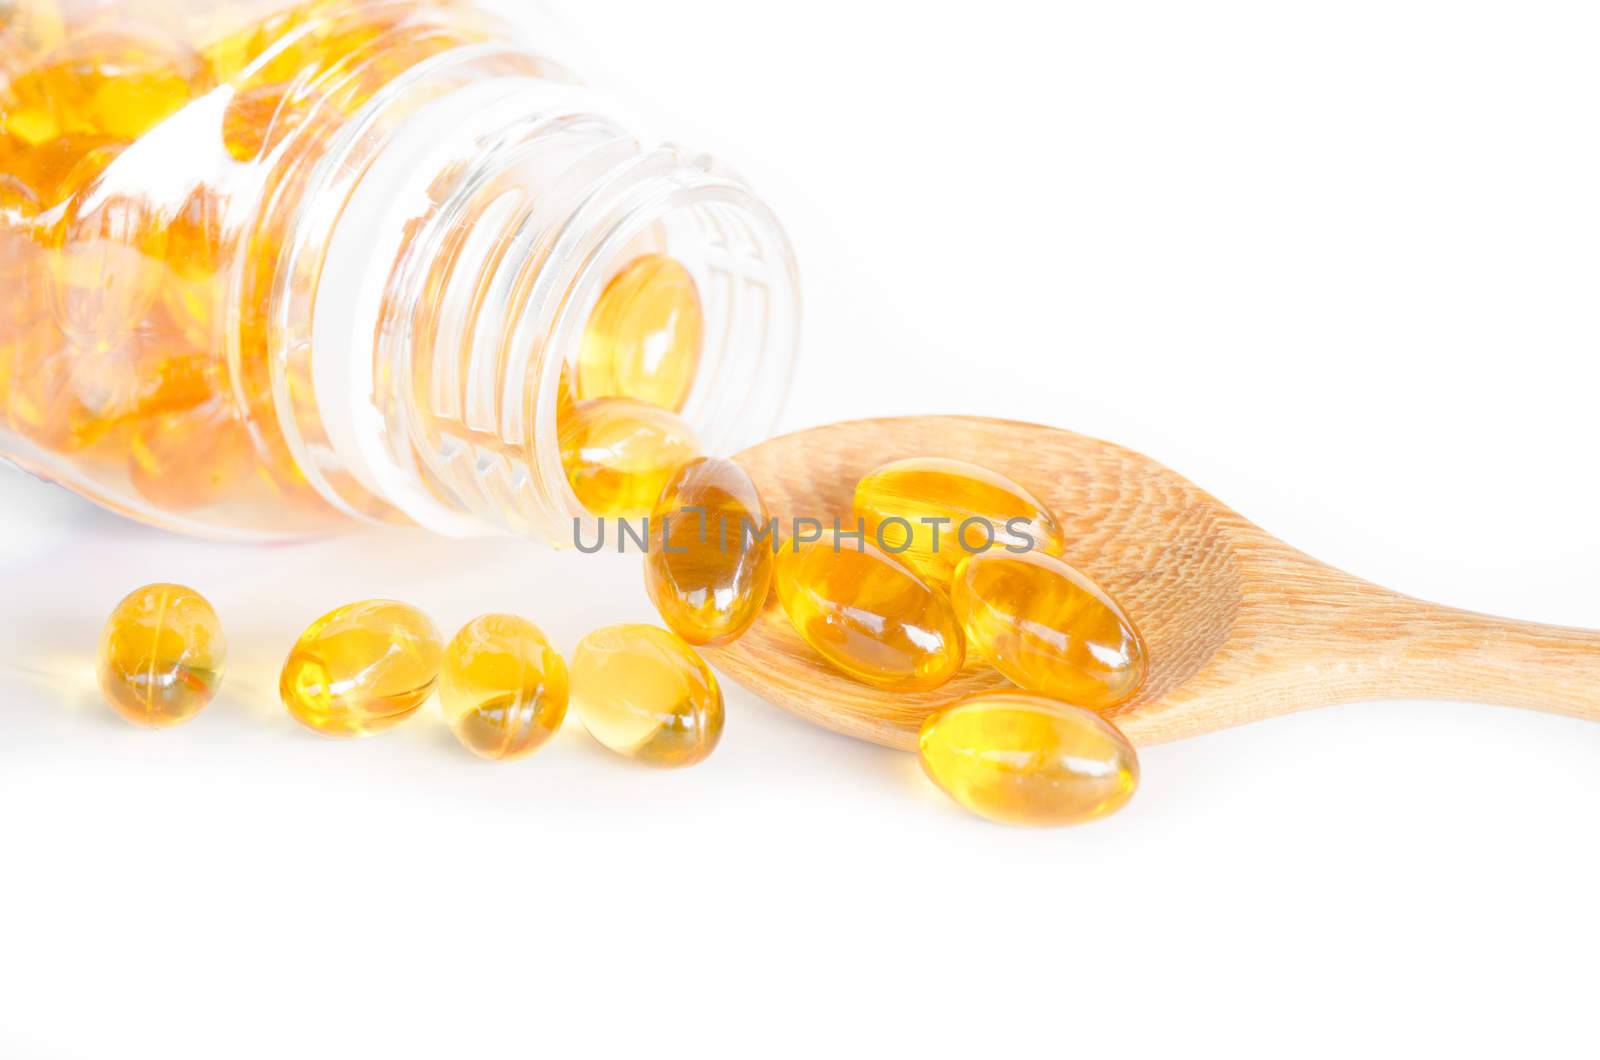 Fish oil capsules in a spoon on wooden background.